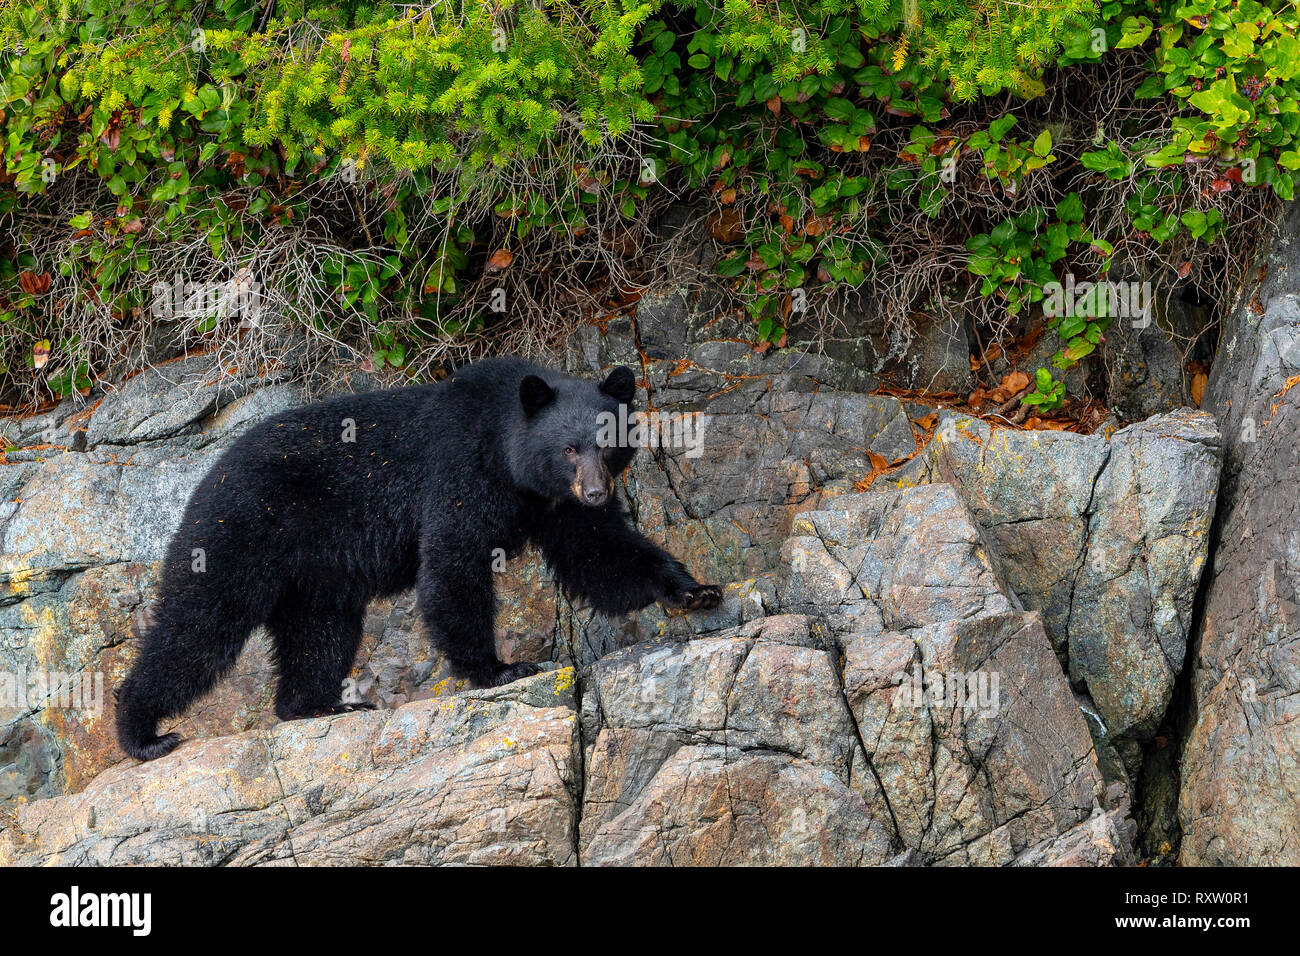 Black bear walking along the high tide line on a small Island in the Broughton Archipelago near the Great Bear Rainforest coast, First Nations Territory, British Columbia, Canada. Stock Photo